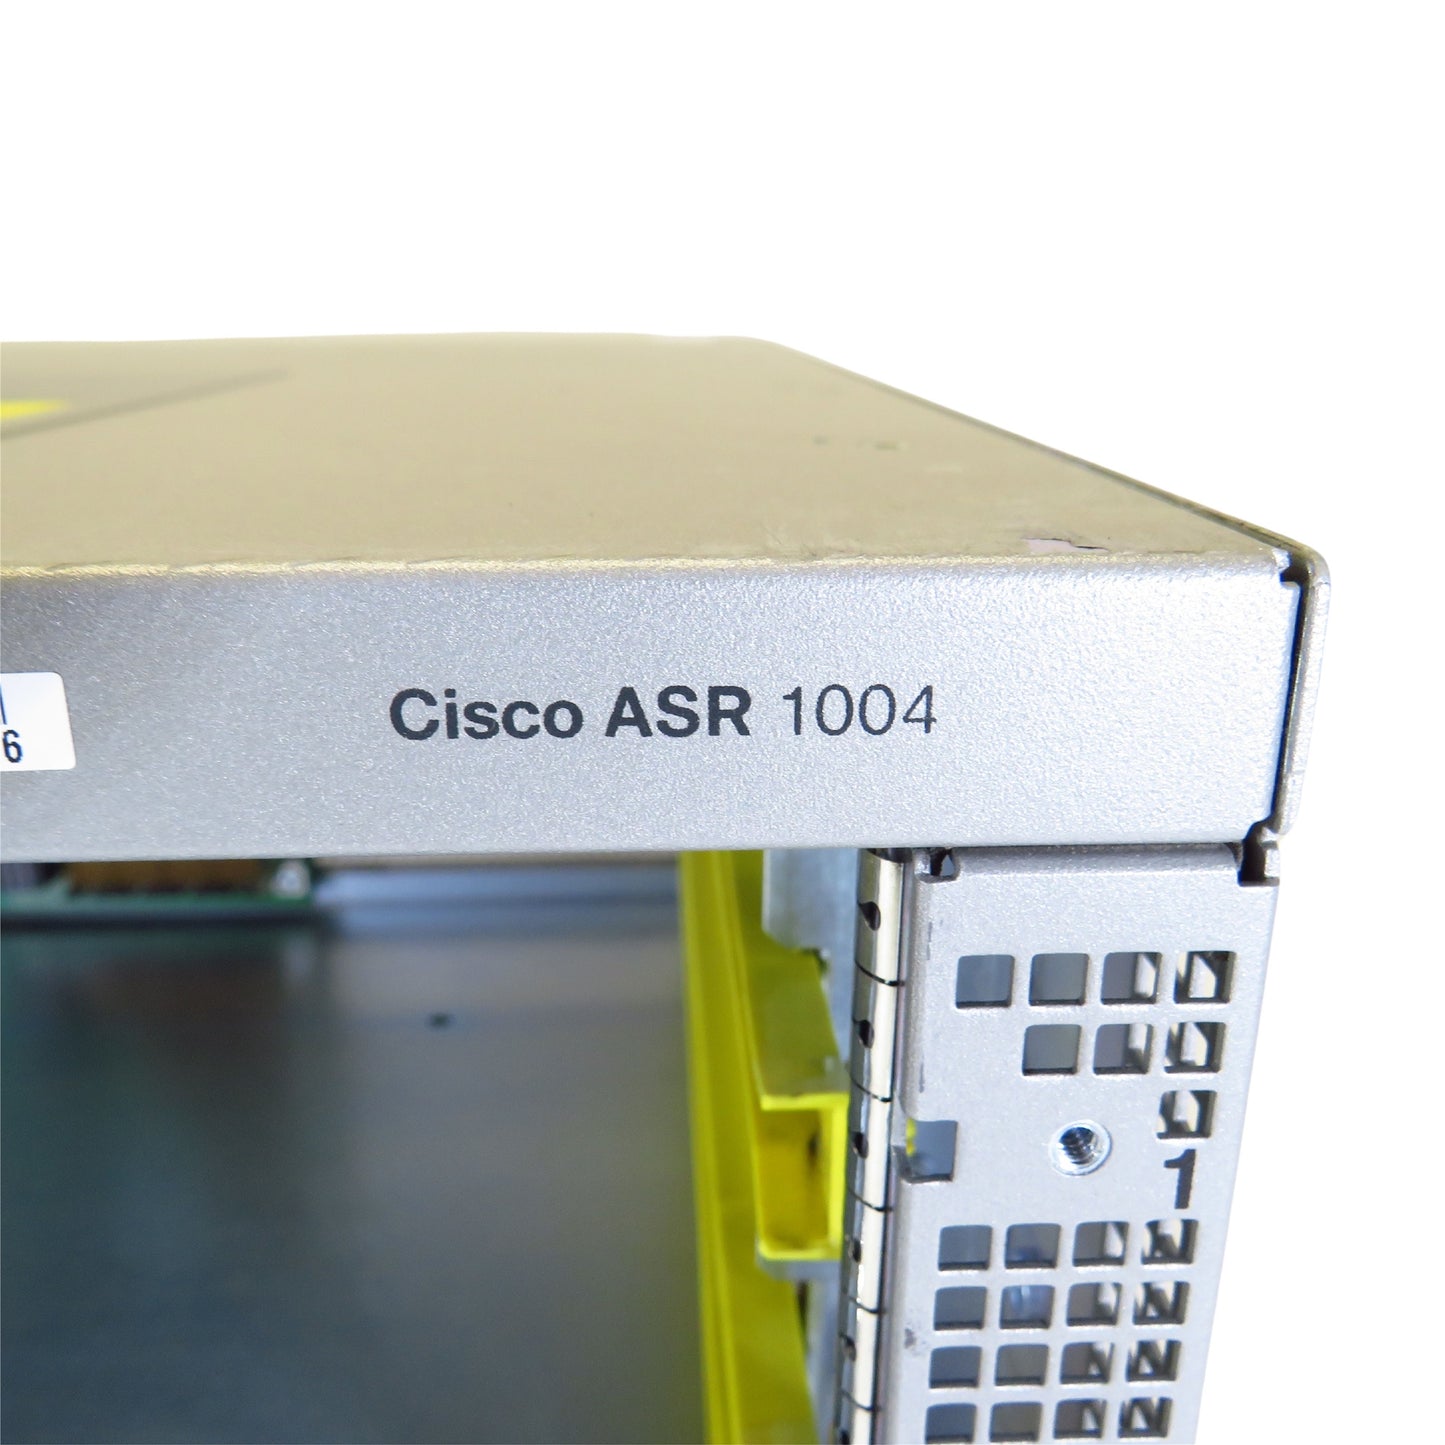 Cisco ASR1004 1000 Series Aggregation Services Router Chassis (Refurbished)